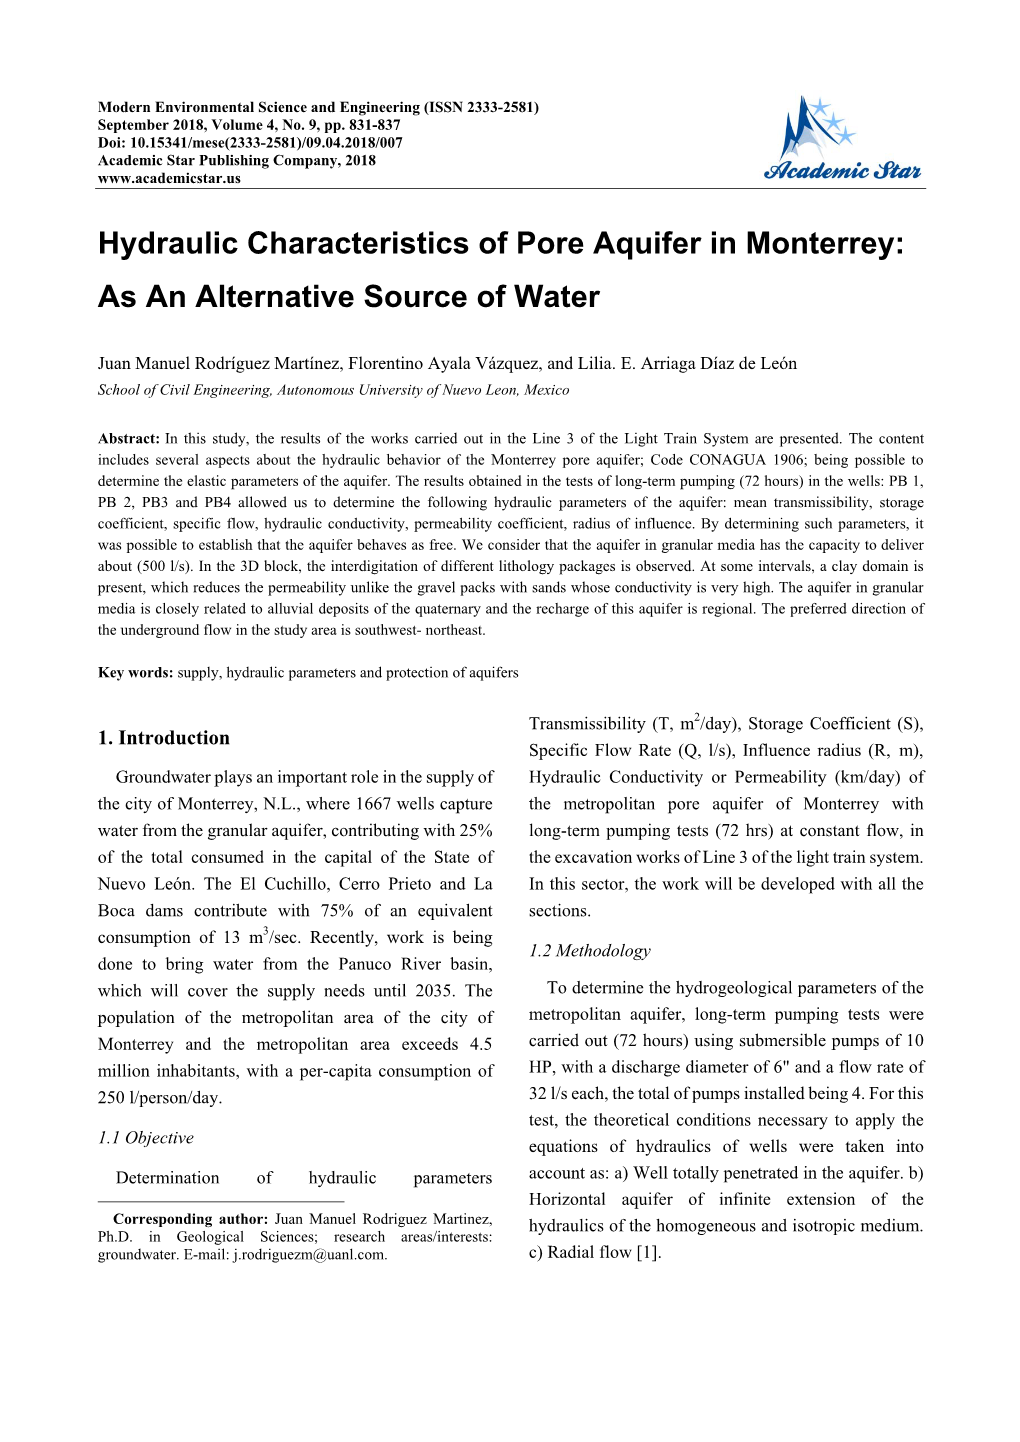 Hydraulic Characteristics of Pore Aquifer in Monterrey: As an Alternative Source of Water